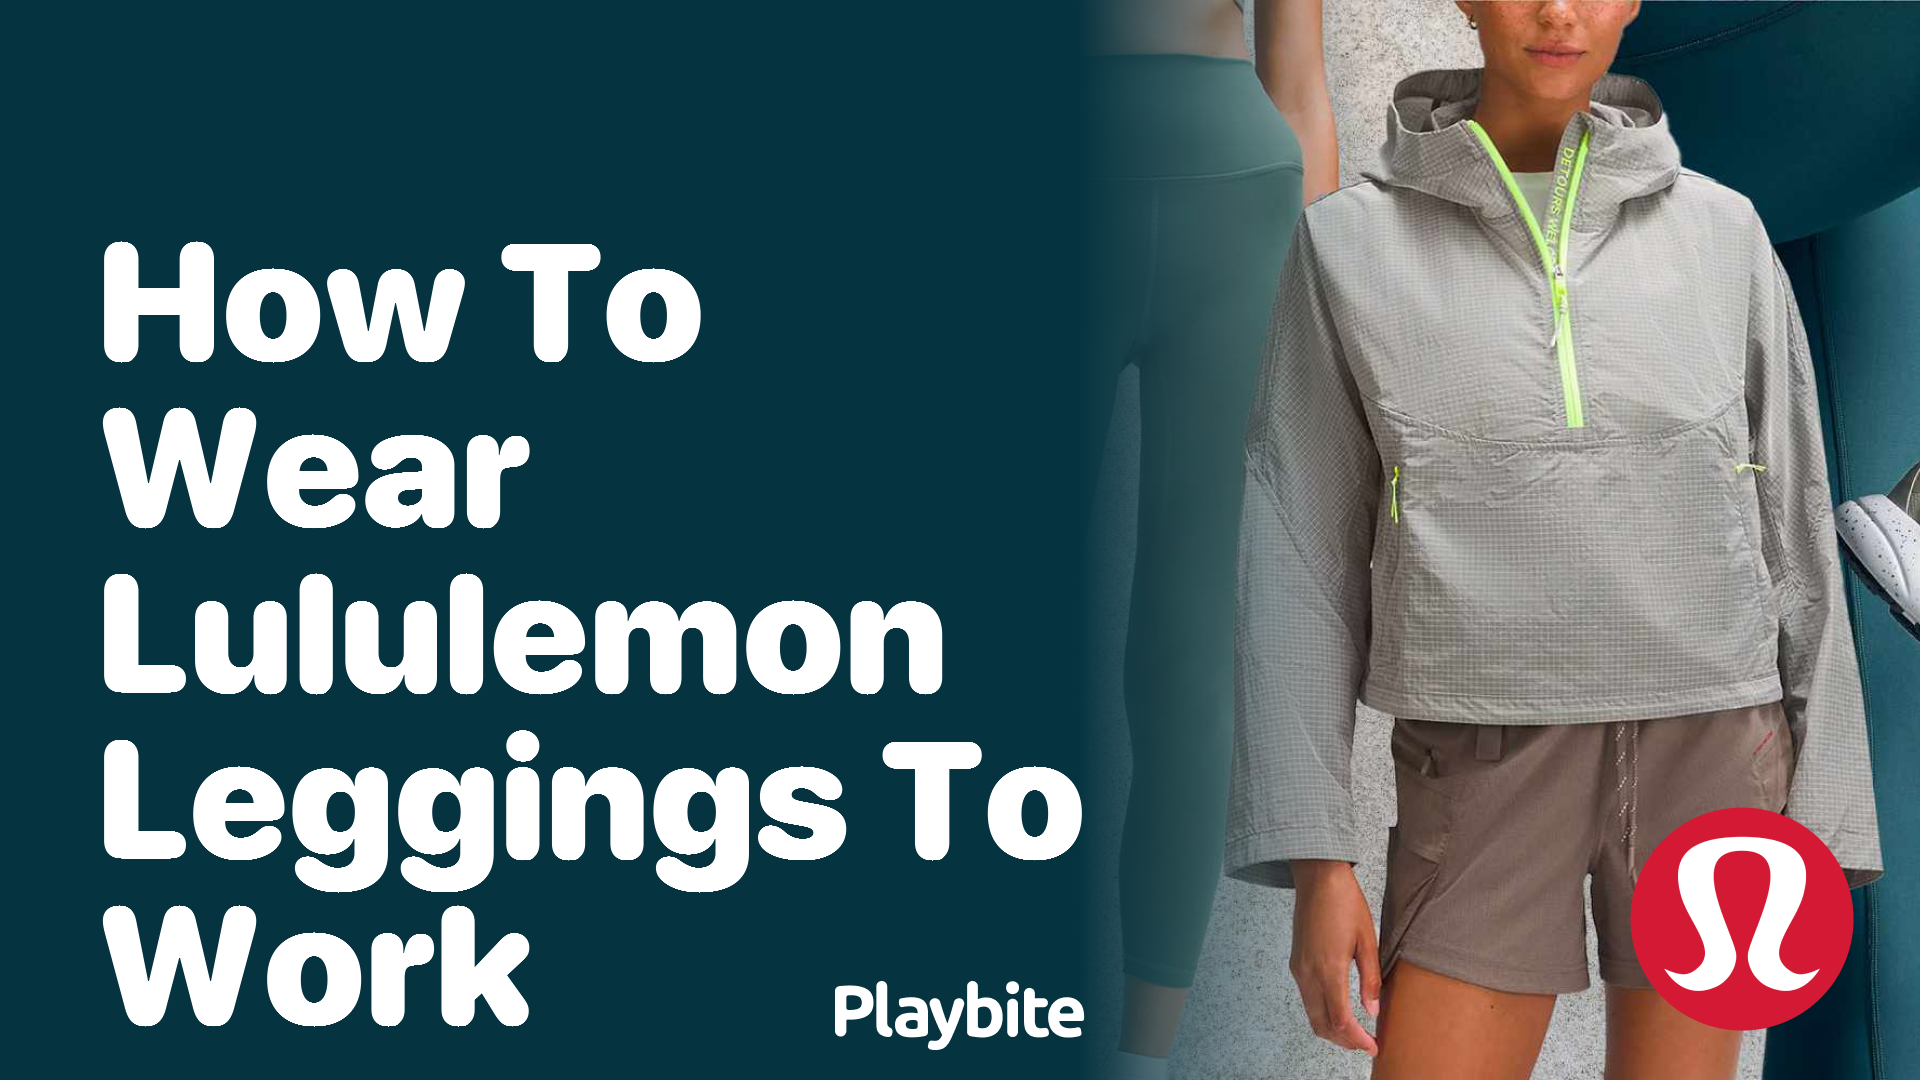 How to Wear Leggings to Work